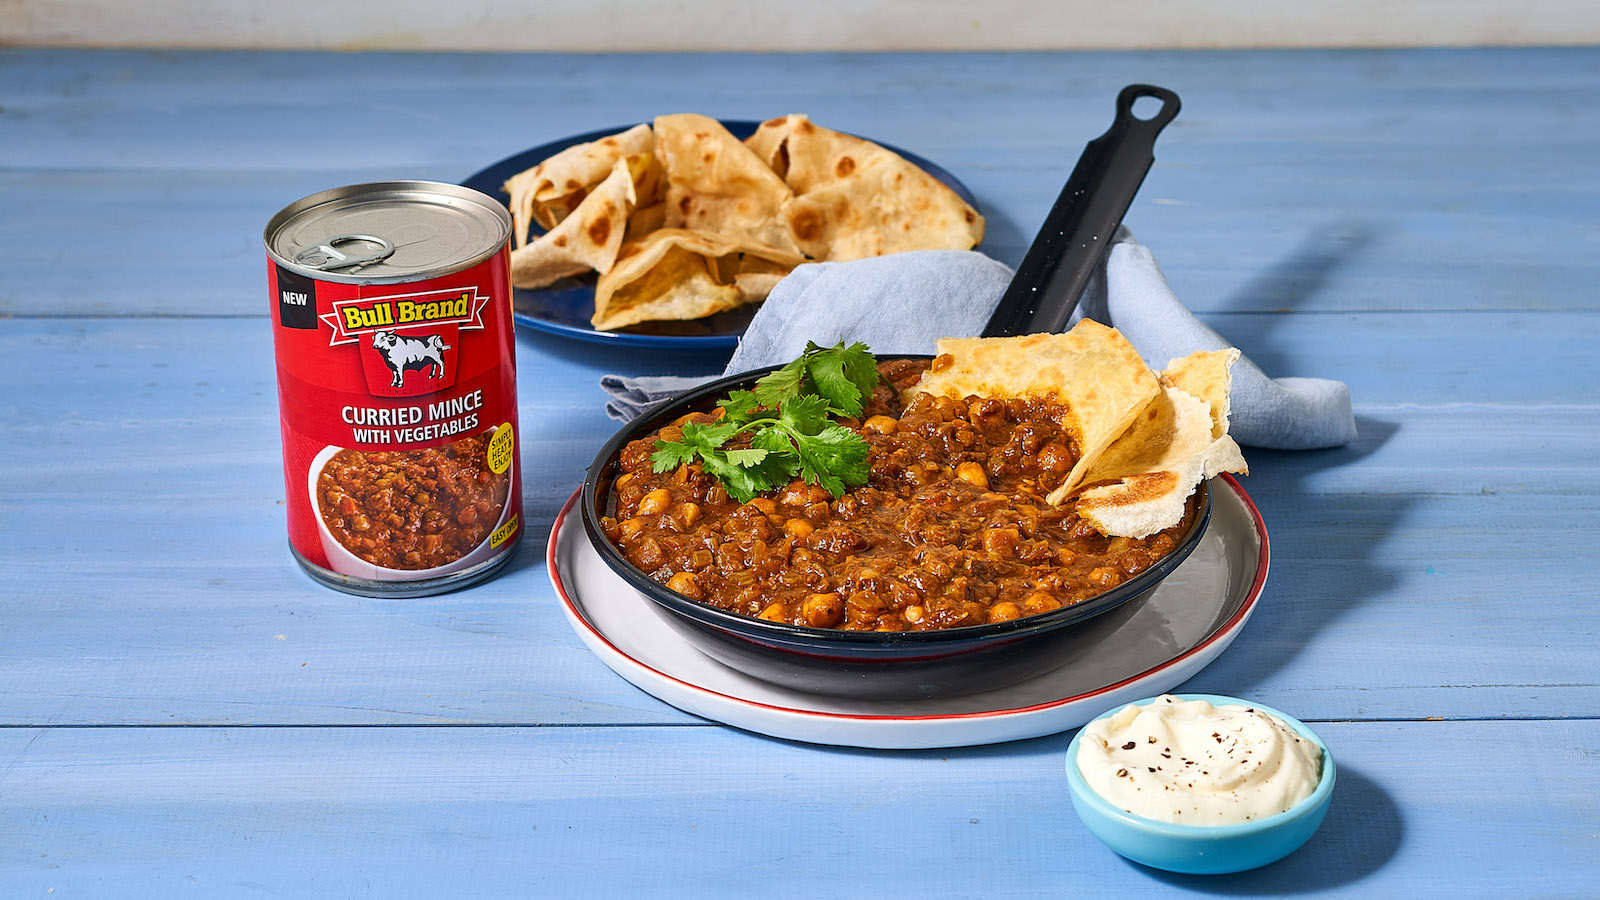 CURRIED MINCE WITH VEGETABLES - Bull Brand